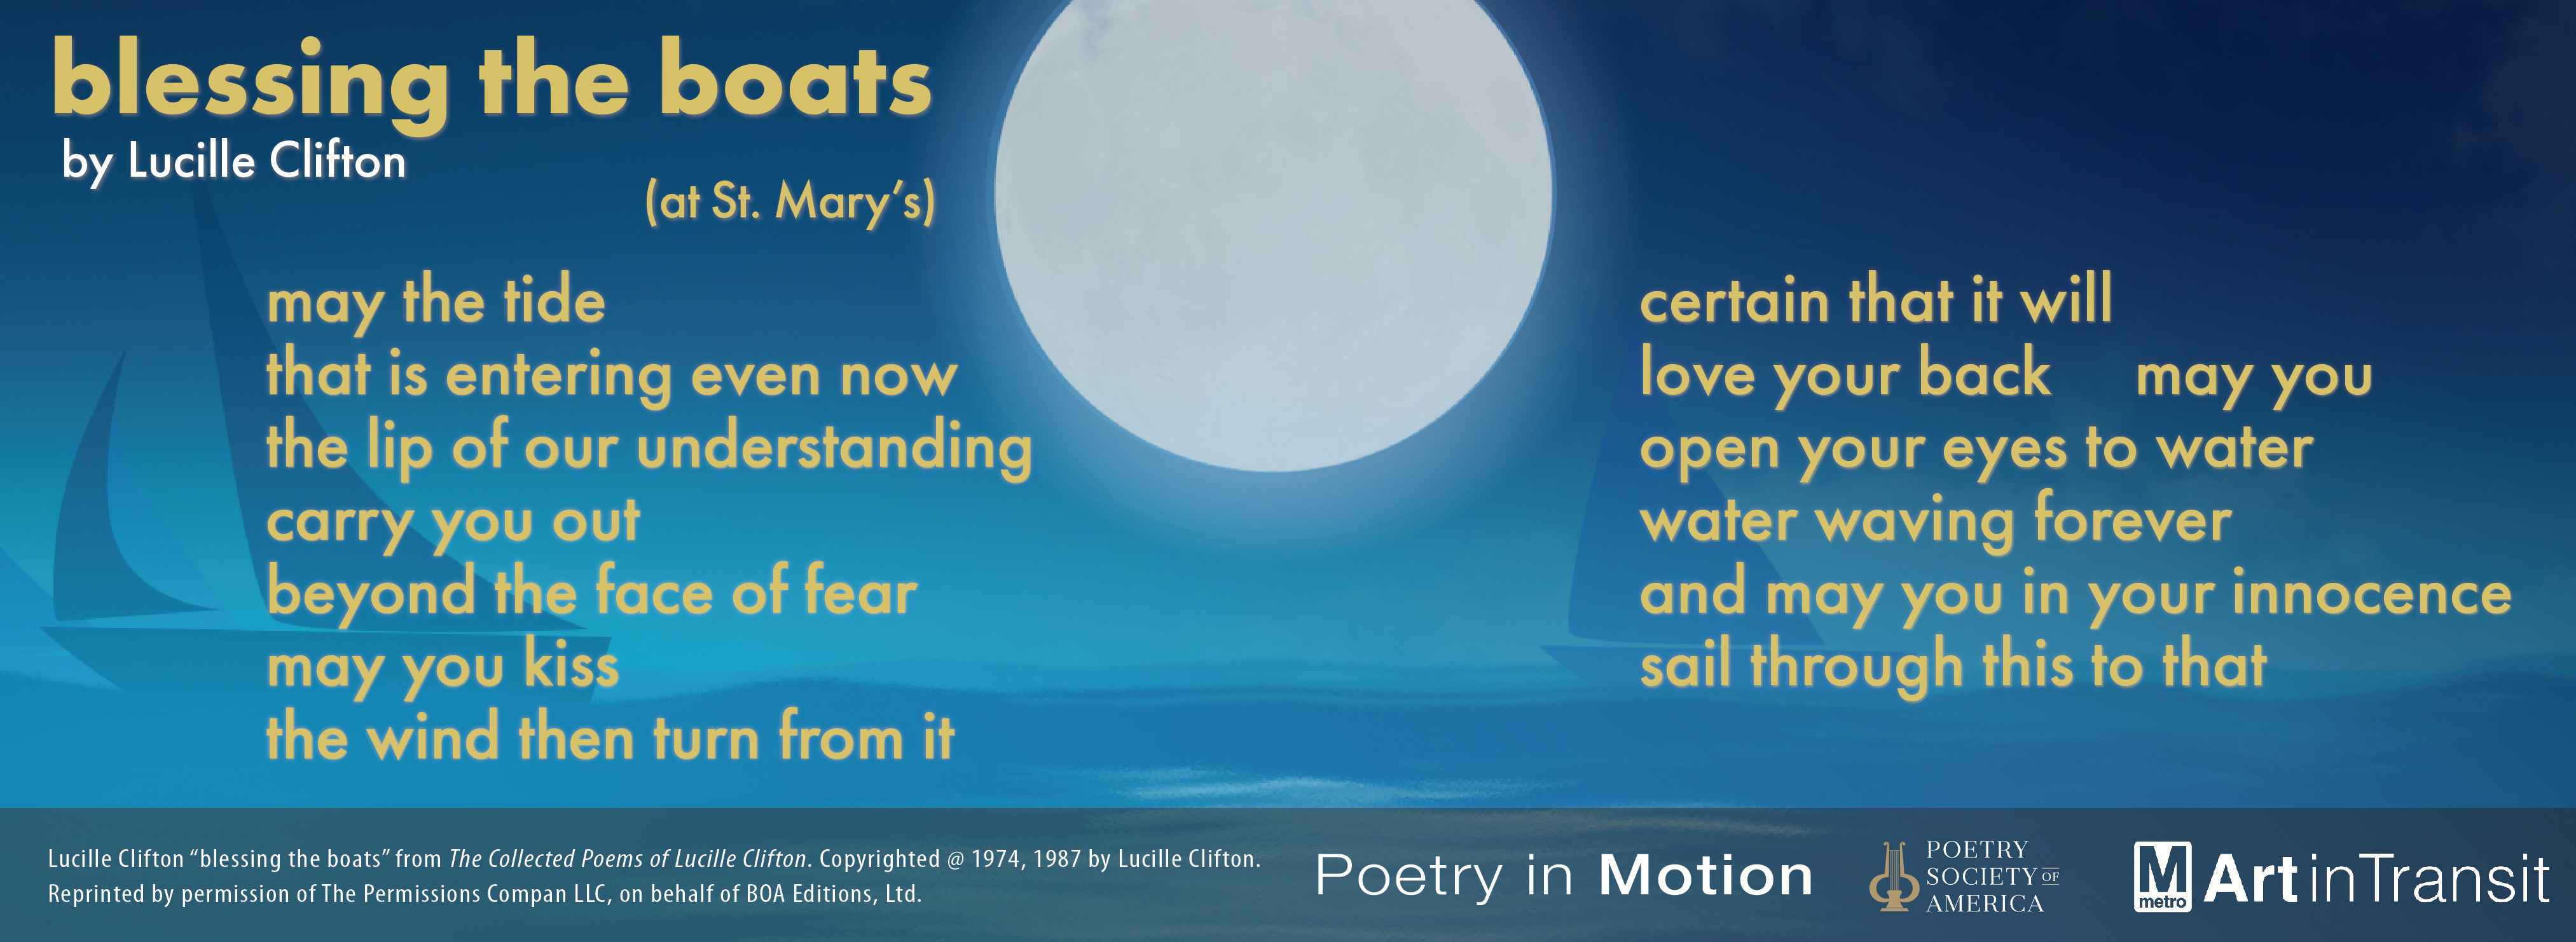 A vertical poster features a large white moon shining over a blue ocean with sailboats. The poster contains the poem blessing the boats, by Lucille Clifton.